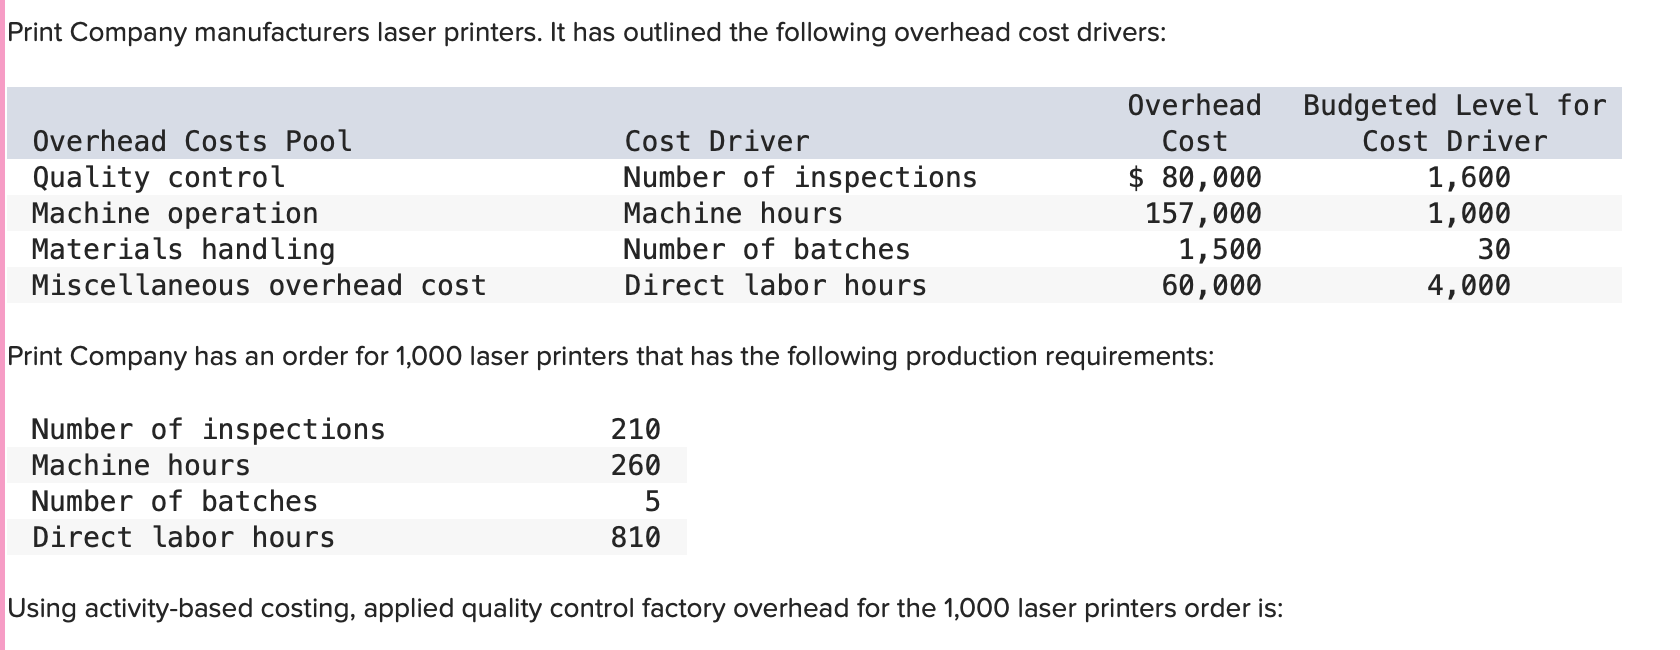 Print Company manufacturers laser printers. It has outlined the following overhead cost drivers: Overhead